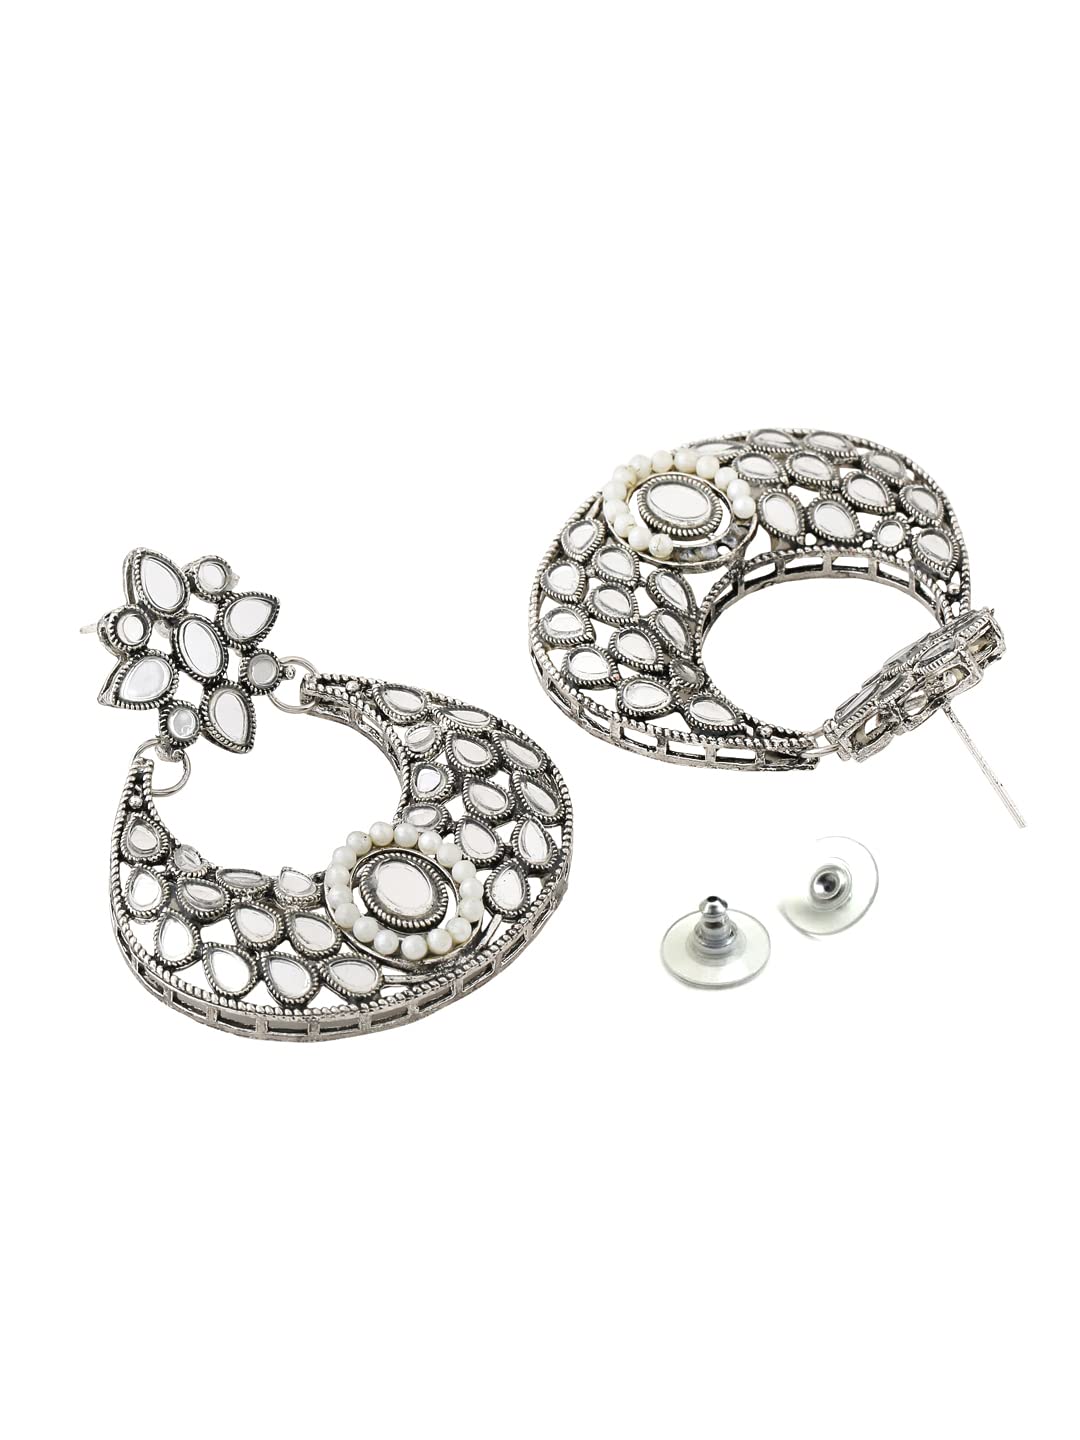 Yellow Chimes Earrings For Women Floral Designed Silver Toned Mirror Studded Chanbali Earrings For Women and Girls (Style 4)